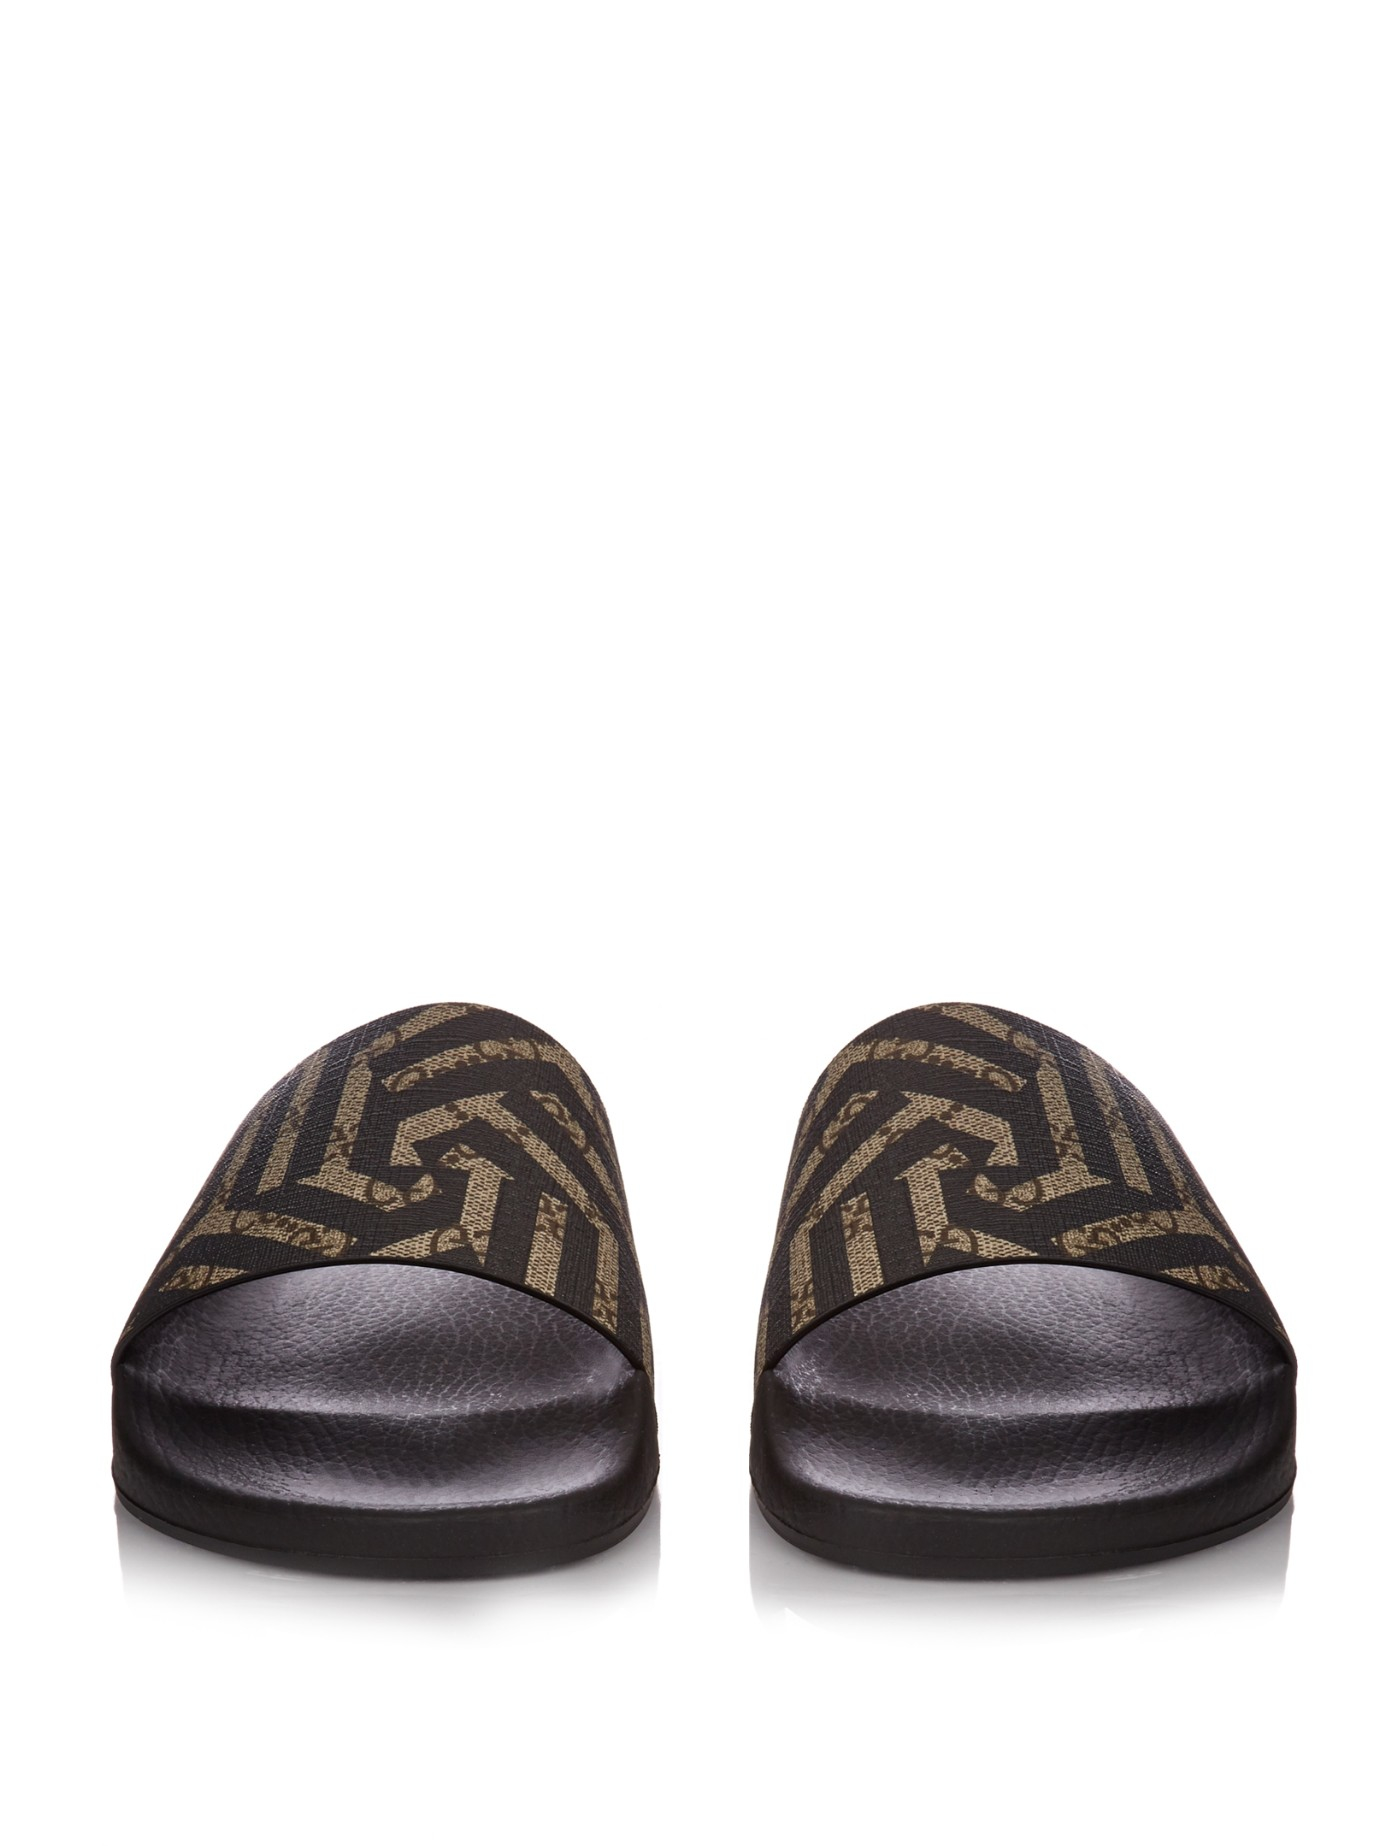 Lyst - Gucci Caleido-print Pool Slides in Brown for Men